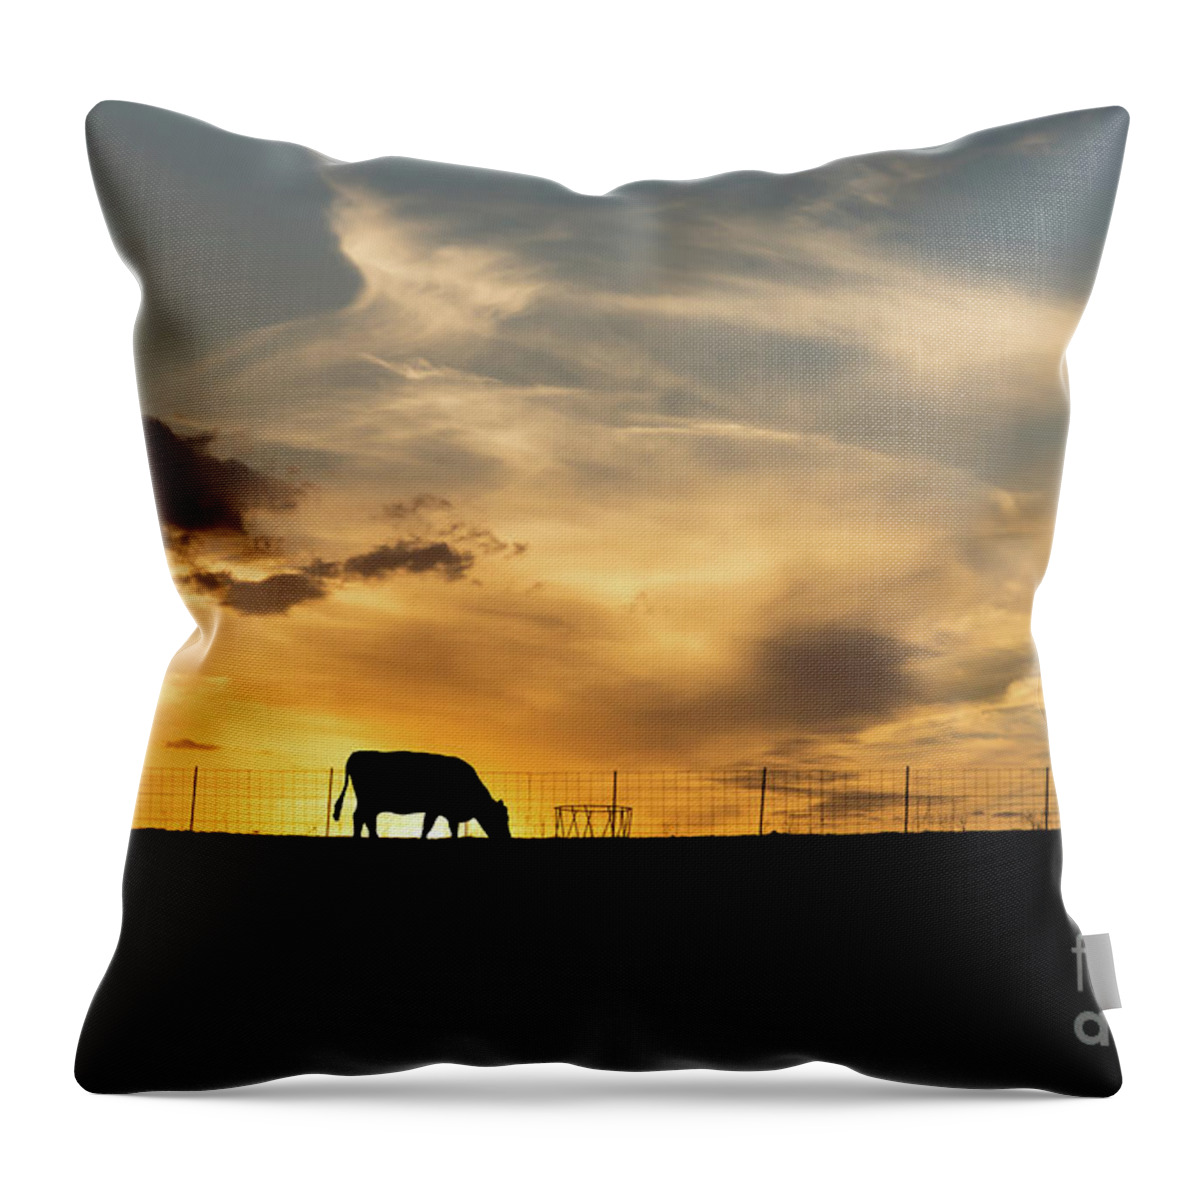 Cow Throw Pillow featuring the photograph Cattle Sunset Silhouette by Jennifer White